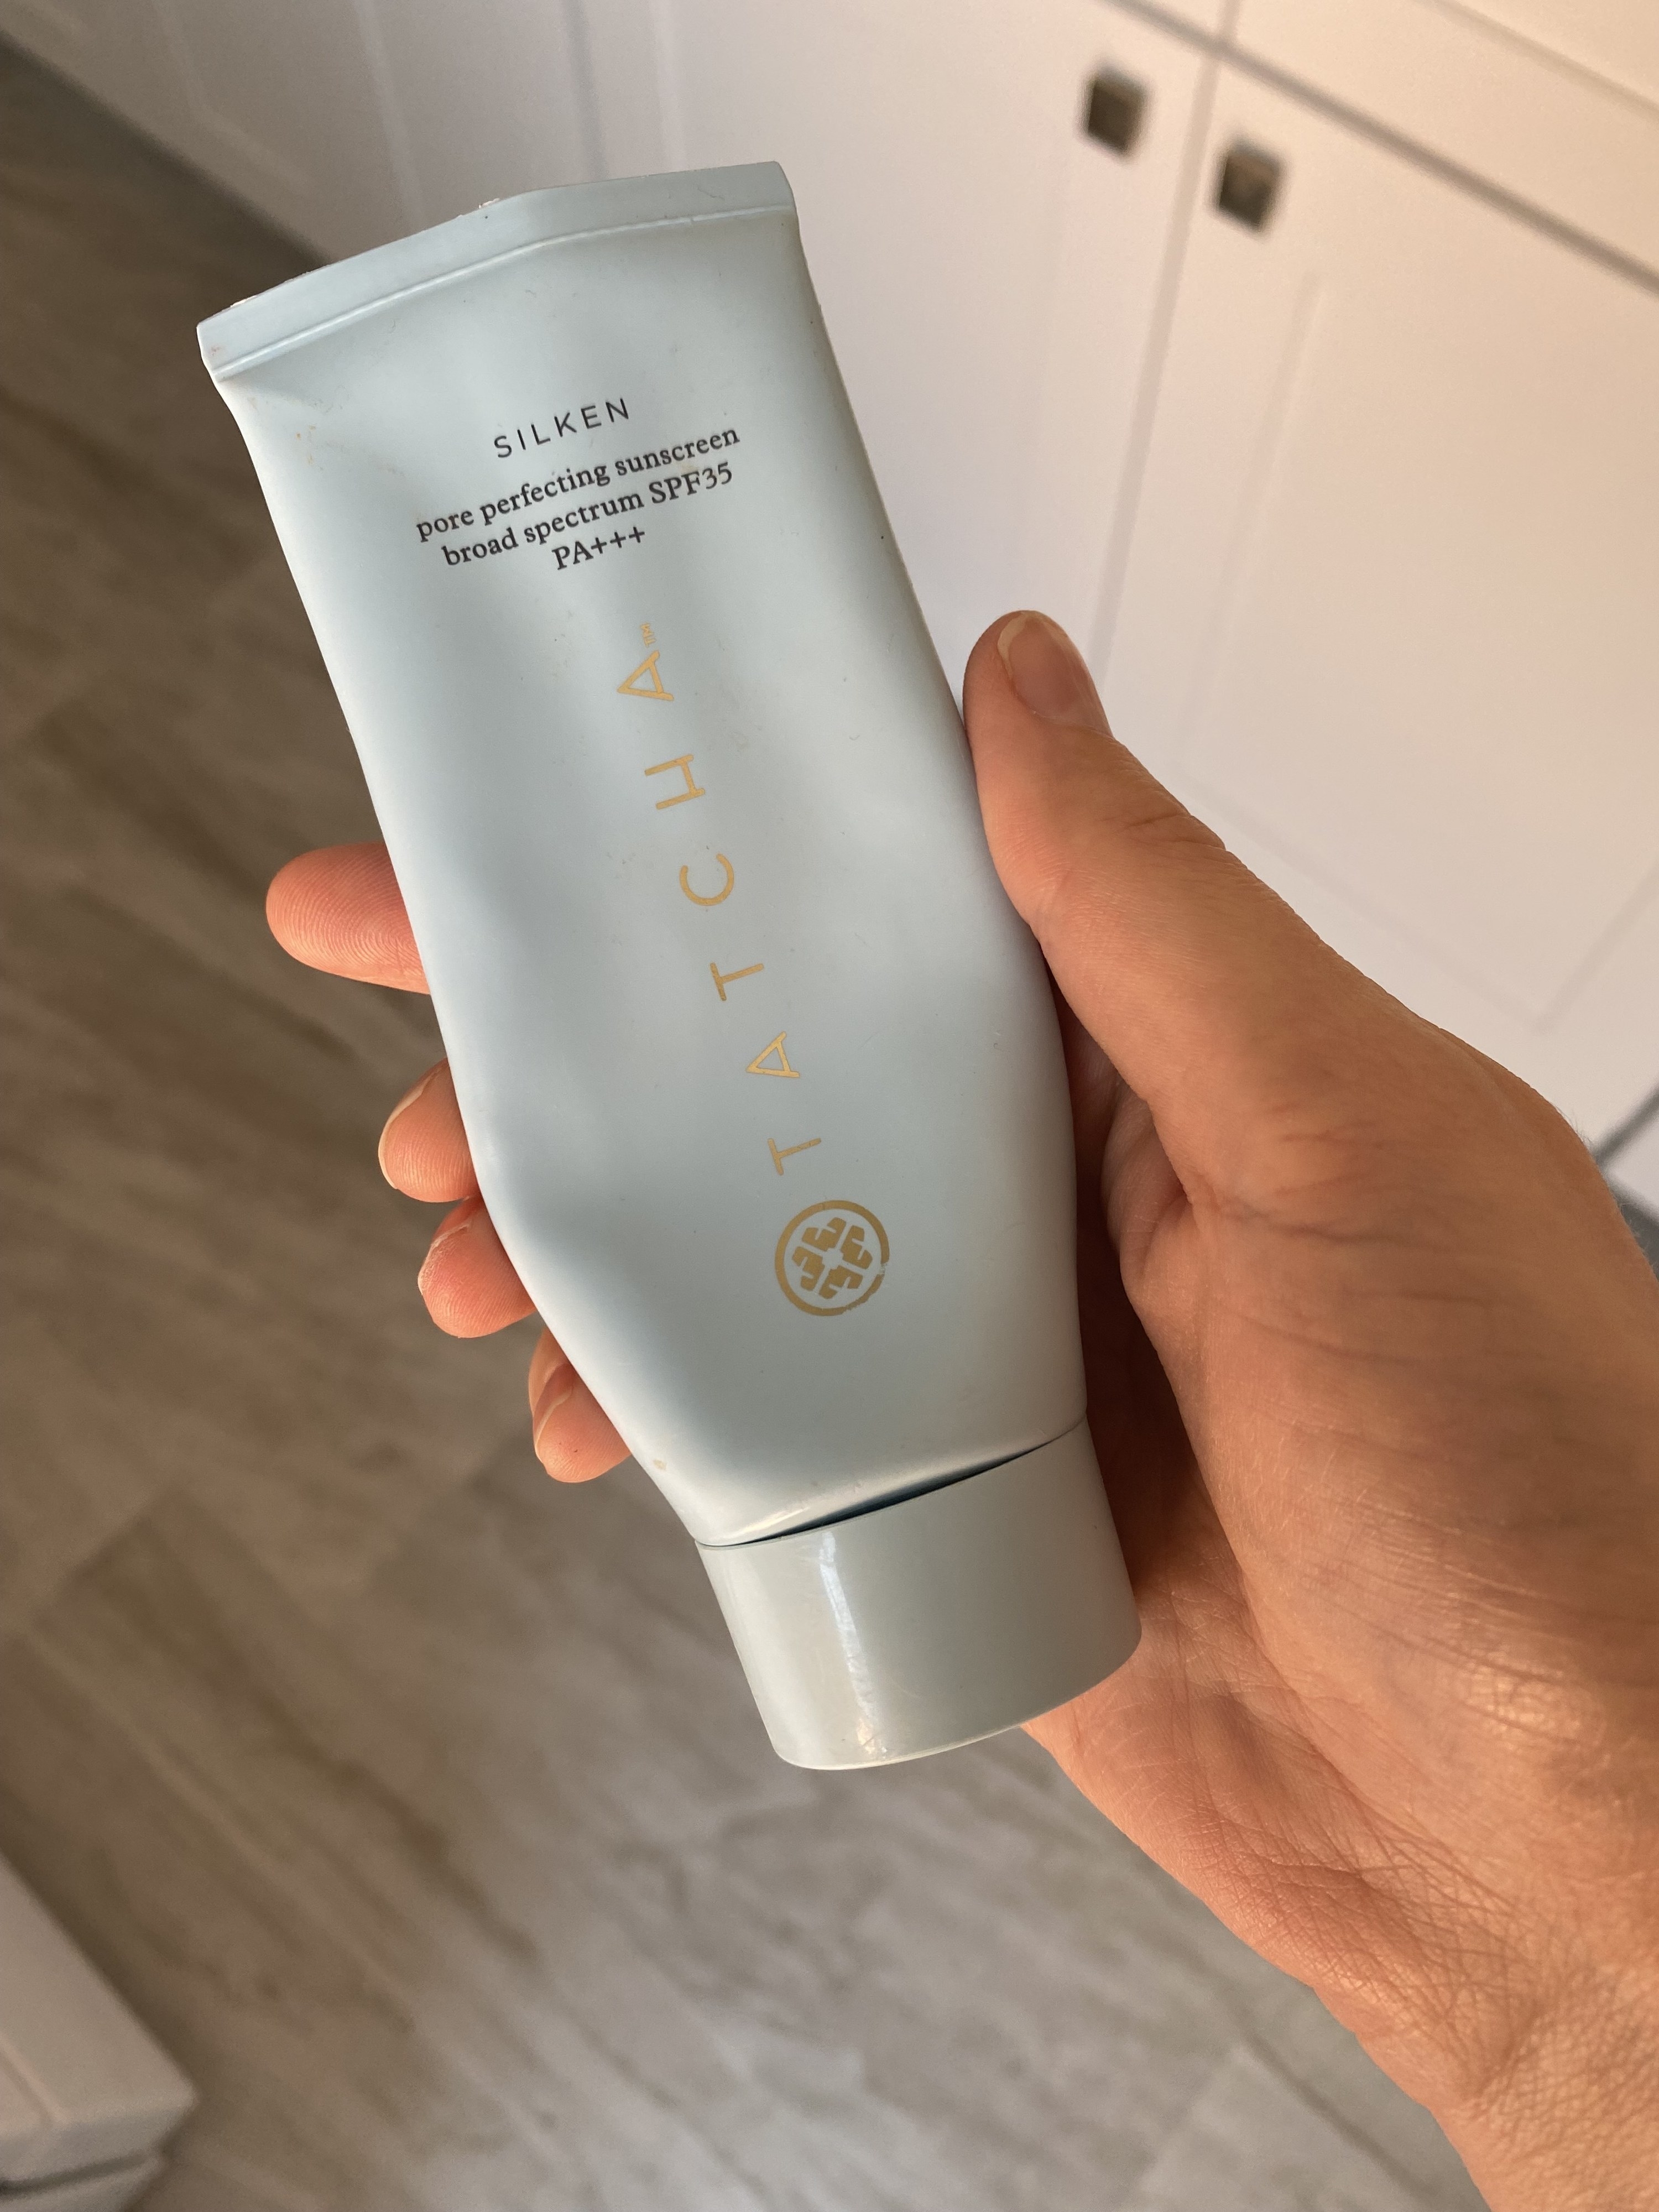 The 3oz bottle of Tatcha sunscreen in my hand